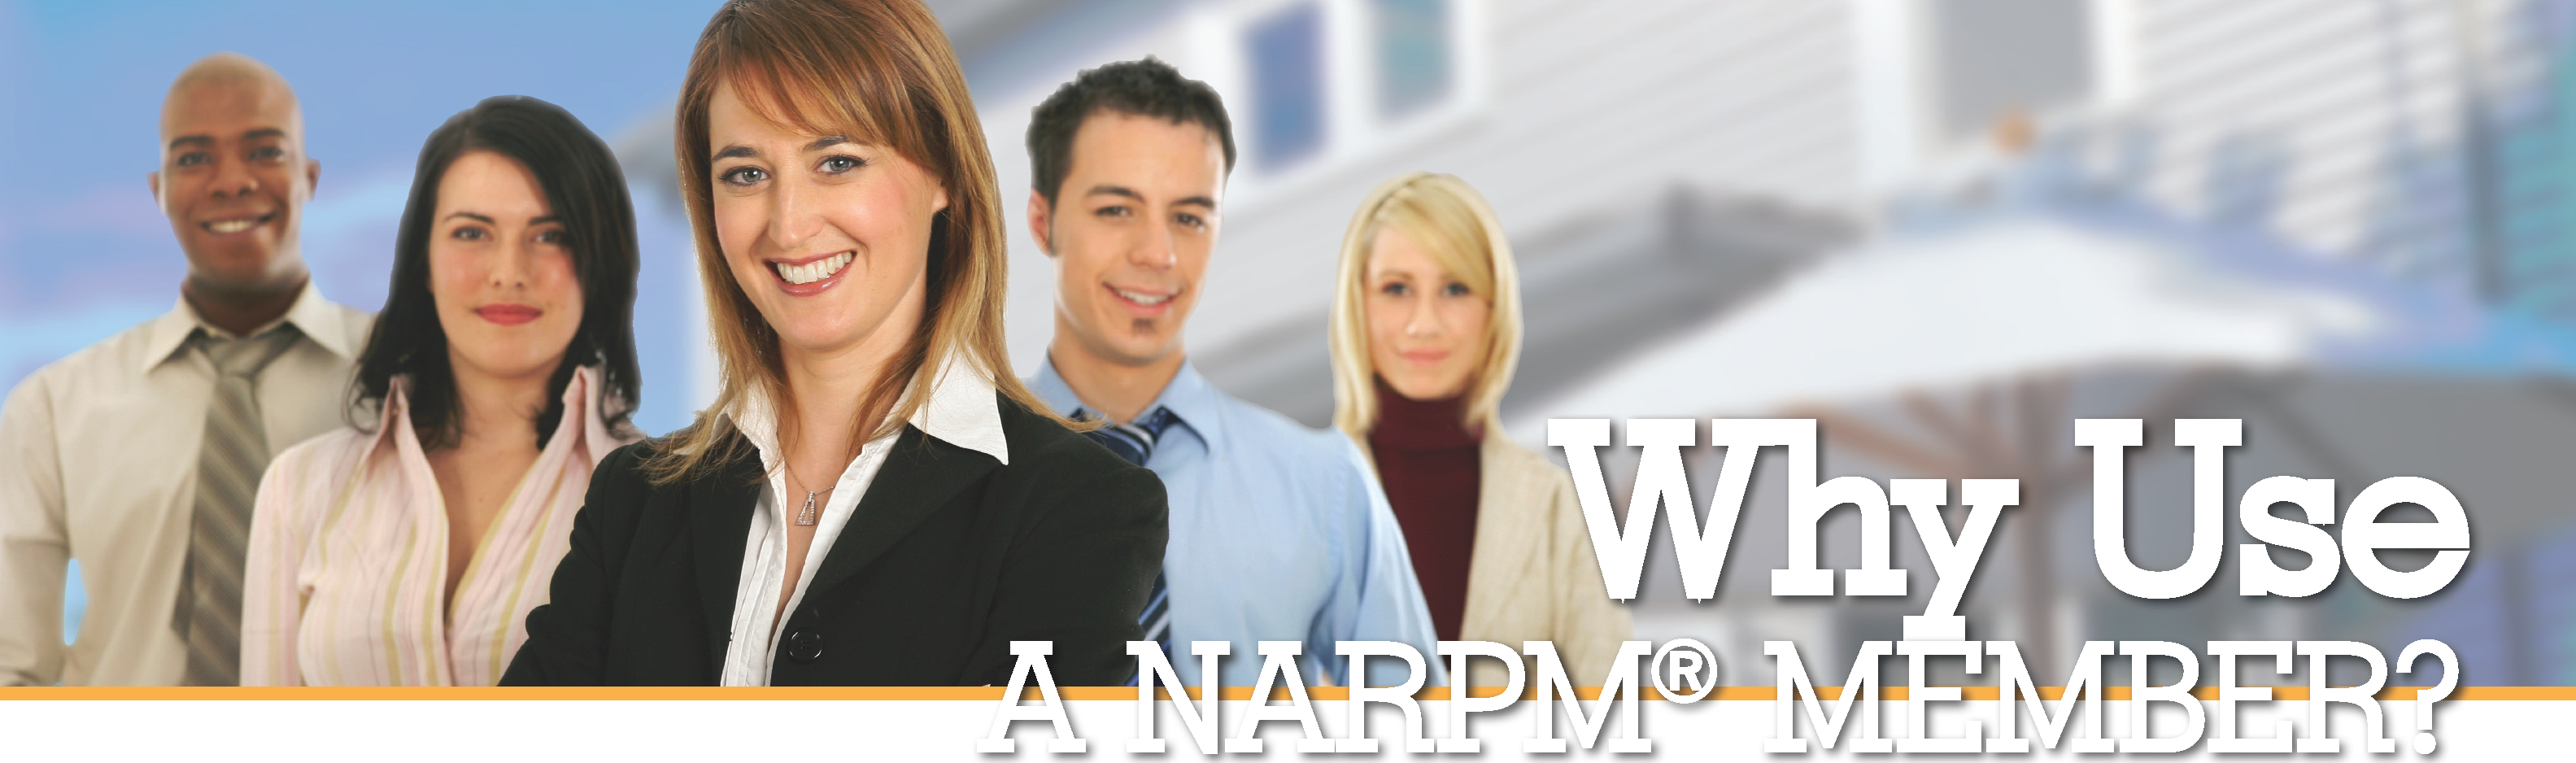 Why Use a NARPM Member